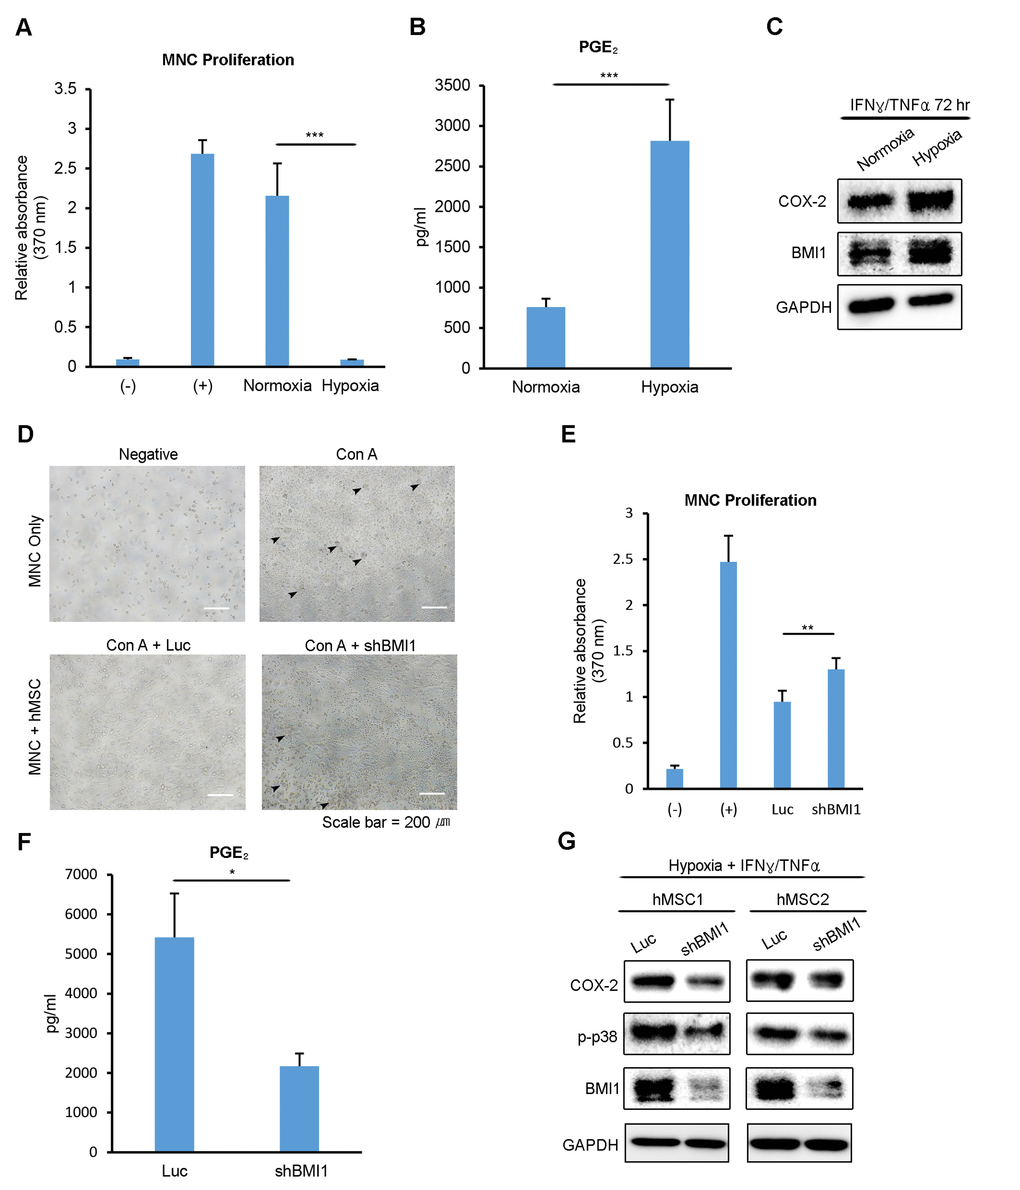 Low oxygen environment increases the BMI1-dependent immunomodulatory properties of hUCB-MSCs. (A, B) The culture supernatant from normoxic- and hypoxic-cultured hUCB-MSCs was collected after treatment with IFN-γ and TNF-α for 72 hours. (A) hUCB-MNCs were cultured with each supernatant after being activated with concanavalin A. After 3 days, the proliferation of MNCs was determined using a BrdU assay kit. (B) PGE2 concentration was measured using an ELISA kit. (C) Proteins were extracted after collecting the supernatant, and a western blot analysis was performed with the indicated antibodies. Representative blots are shown. (D) The effect on the immunosuppressive properties of BMI1-down-regulated hUCB-MSCs was investigated via a co-culture experiment. (E) Proliferation levels of hUCB-MNCs were measured using a BrdU assay kit. (F) PGE2 concentration levels were measured from the culture supernatant of control- and shBMI1-induced hUCB-MSCs. (G) Western blot analysis of COX-2 signaling factors was conducted. Error bars represent mean±s.e.m. from three separate experiments. * PPPt-test.